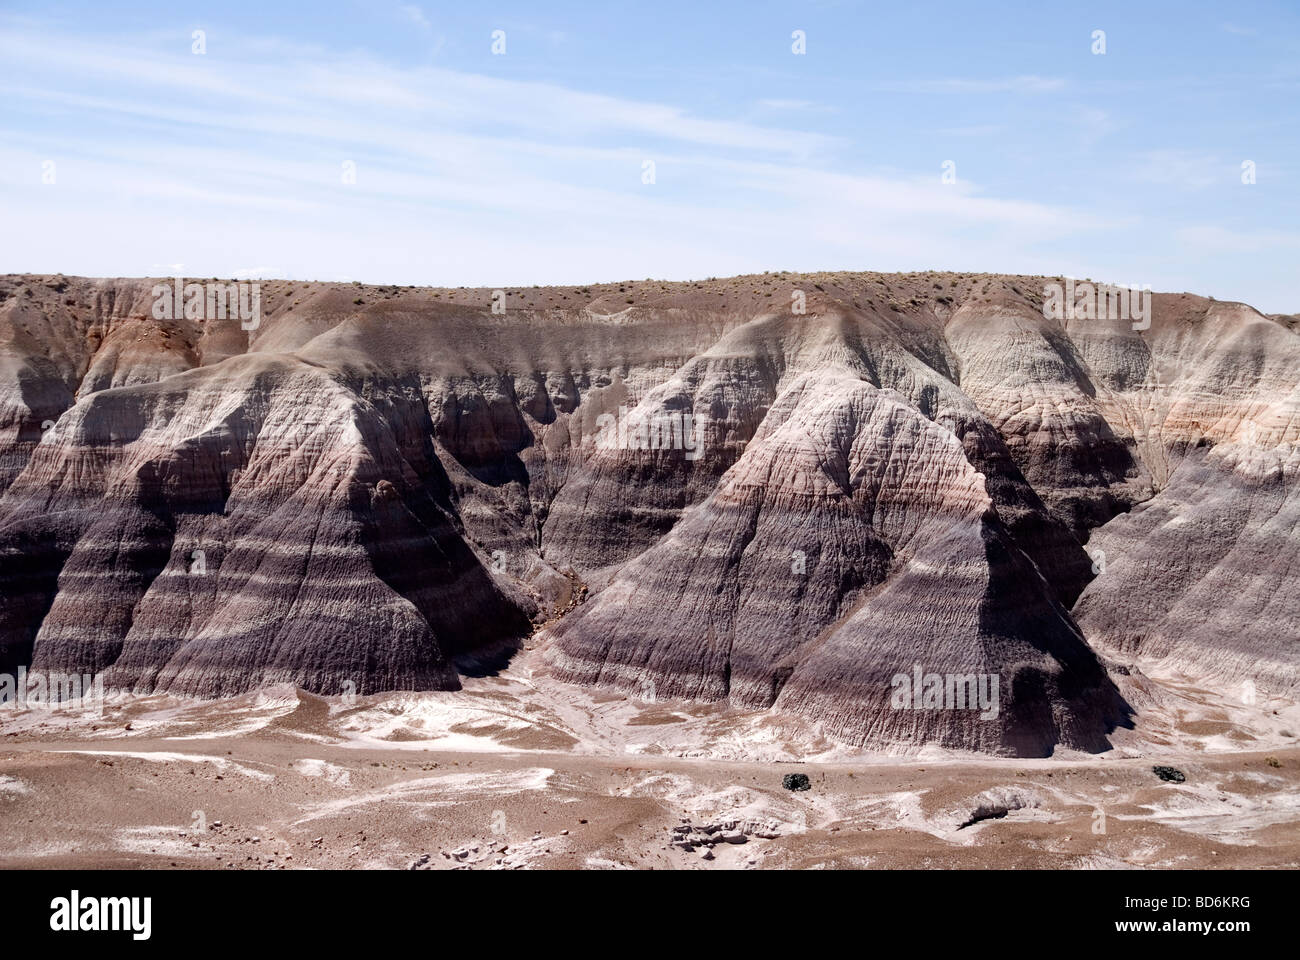 The surreal landscape of the Painted Desert Nation Park in Arizona Stock Photo